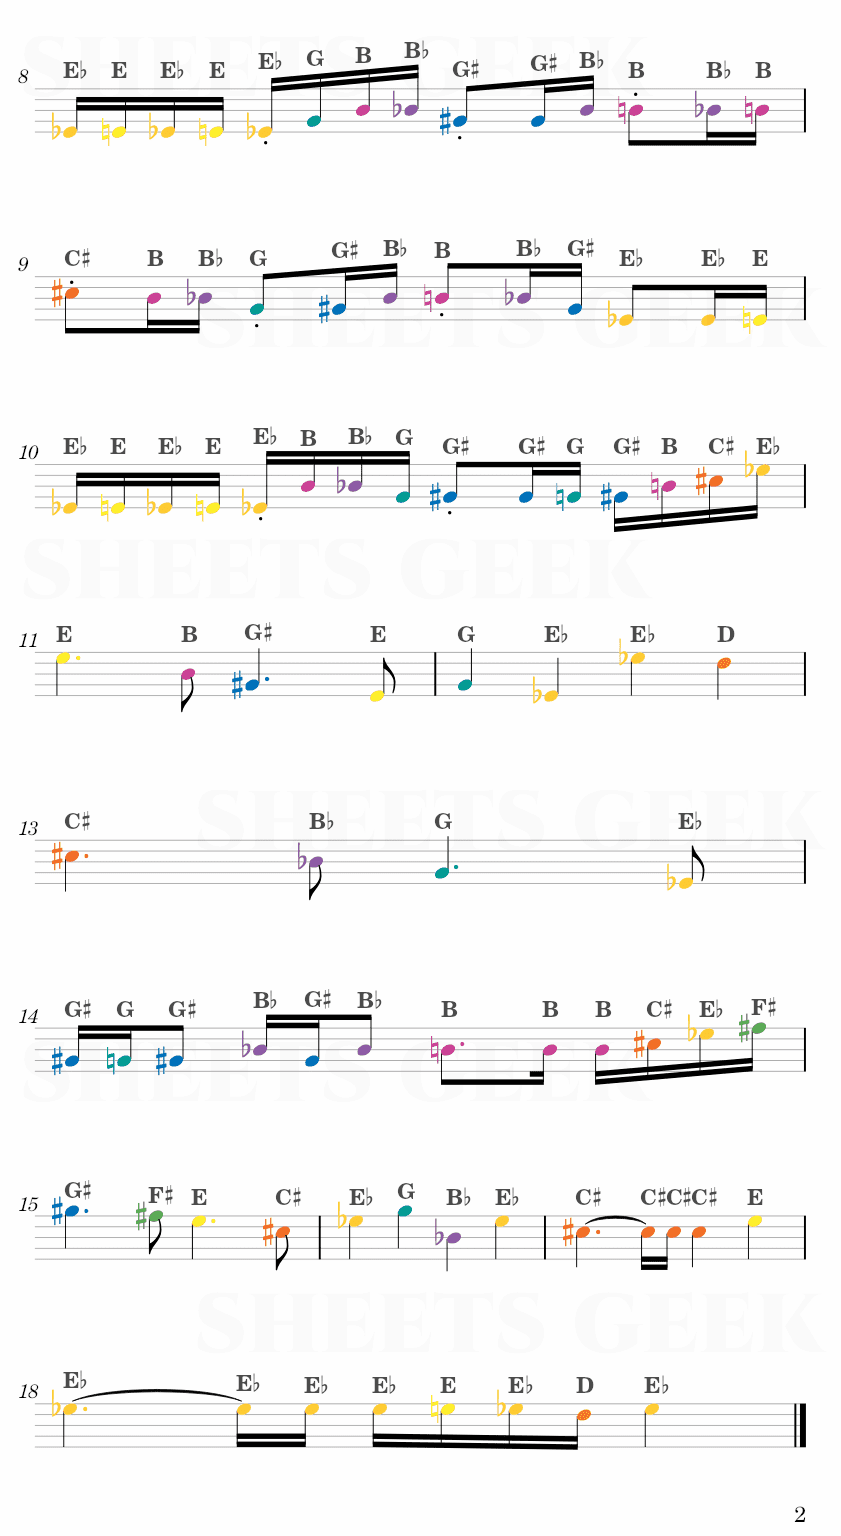 Metal Crusher - Undertale Easy Sheet Music Free for piano, keyboard, flute, violin, sax, cello page 2